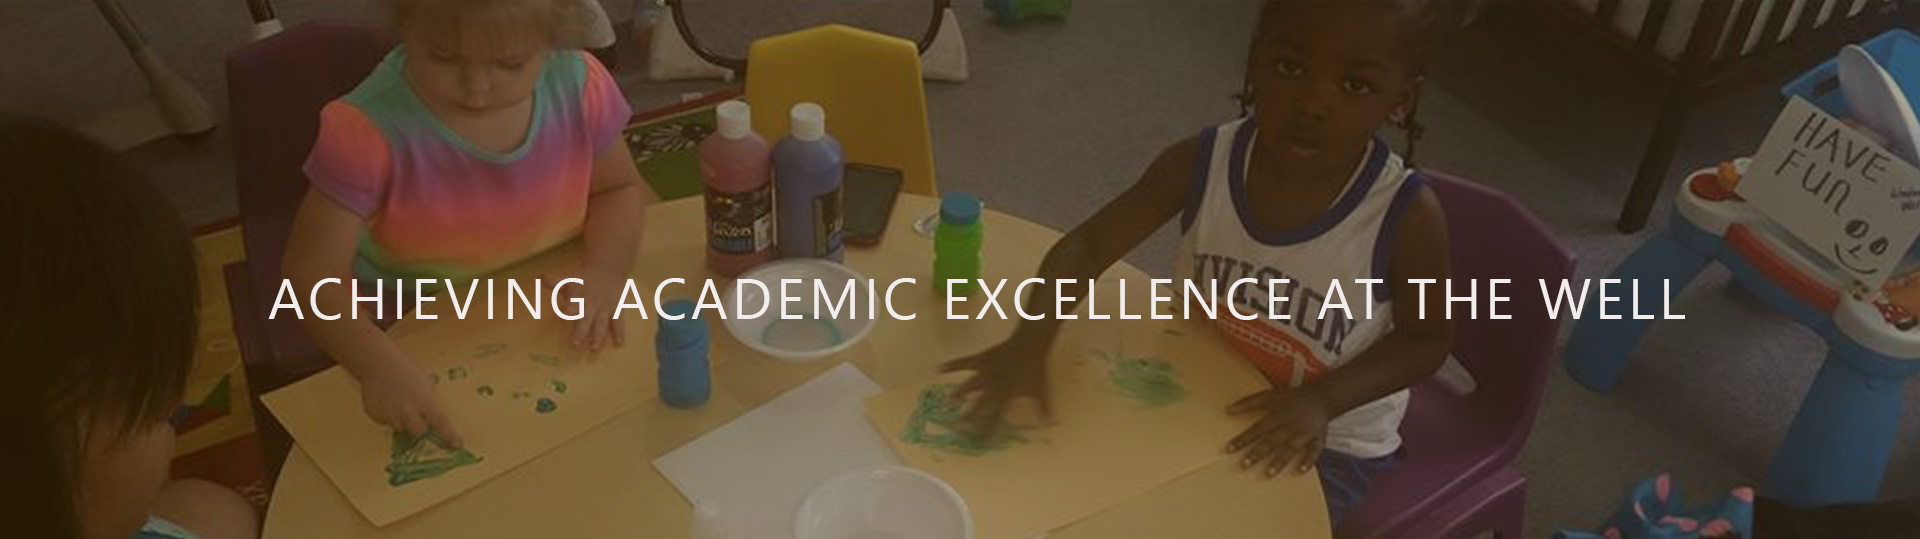 Achieving academic excellence at the Well